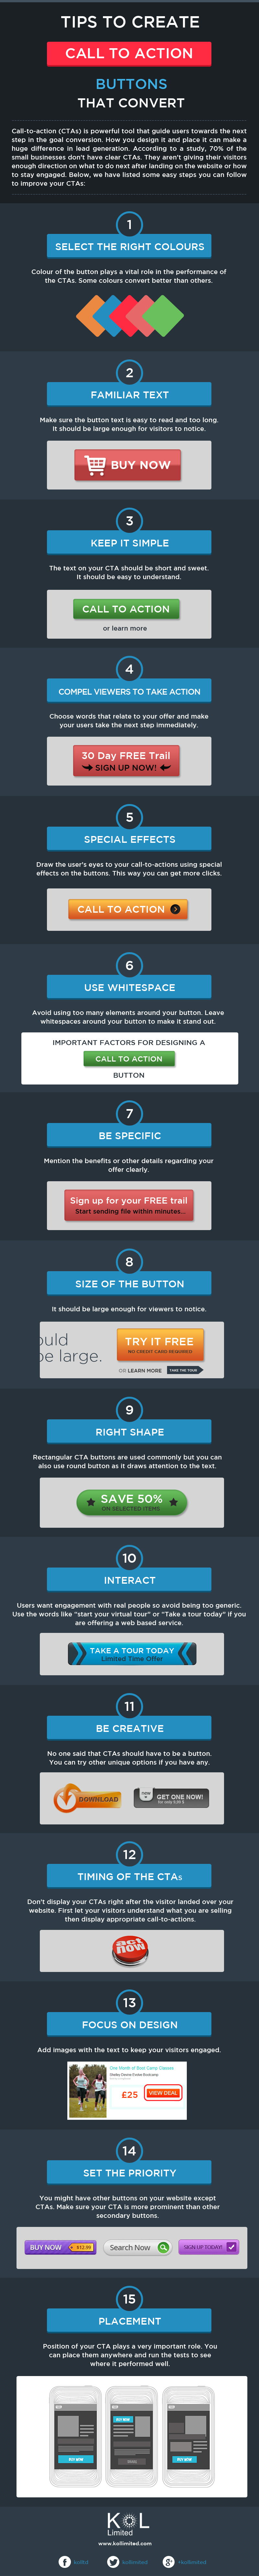 Create Call to Action Buttons That Convert [Infographic] - Image 1